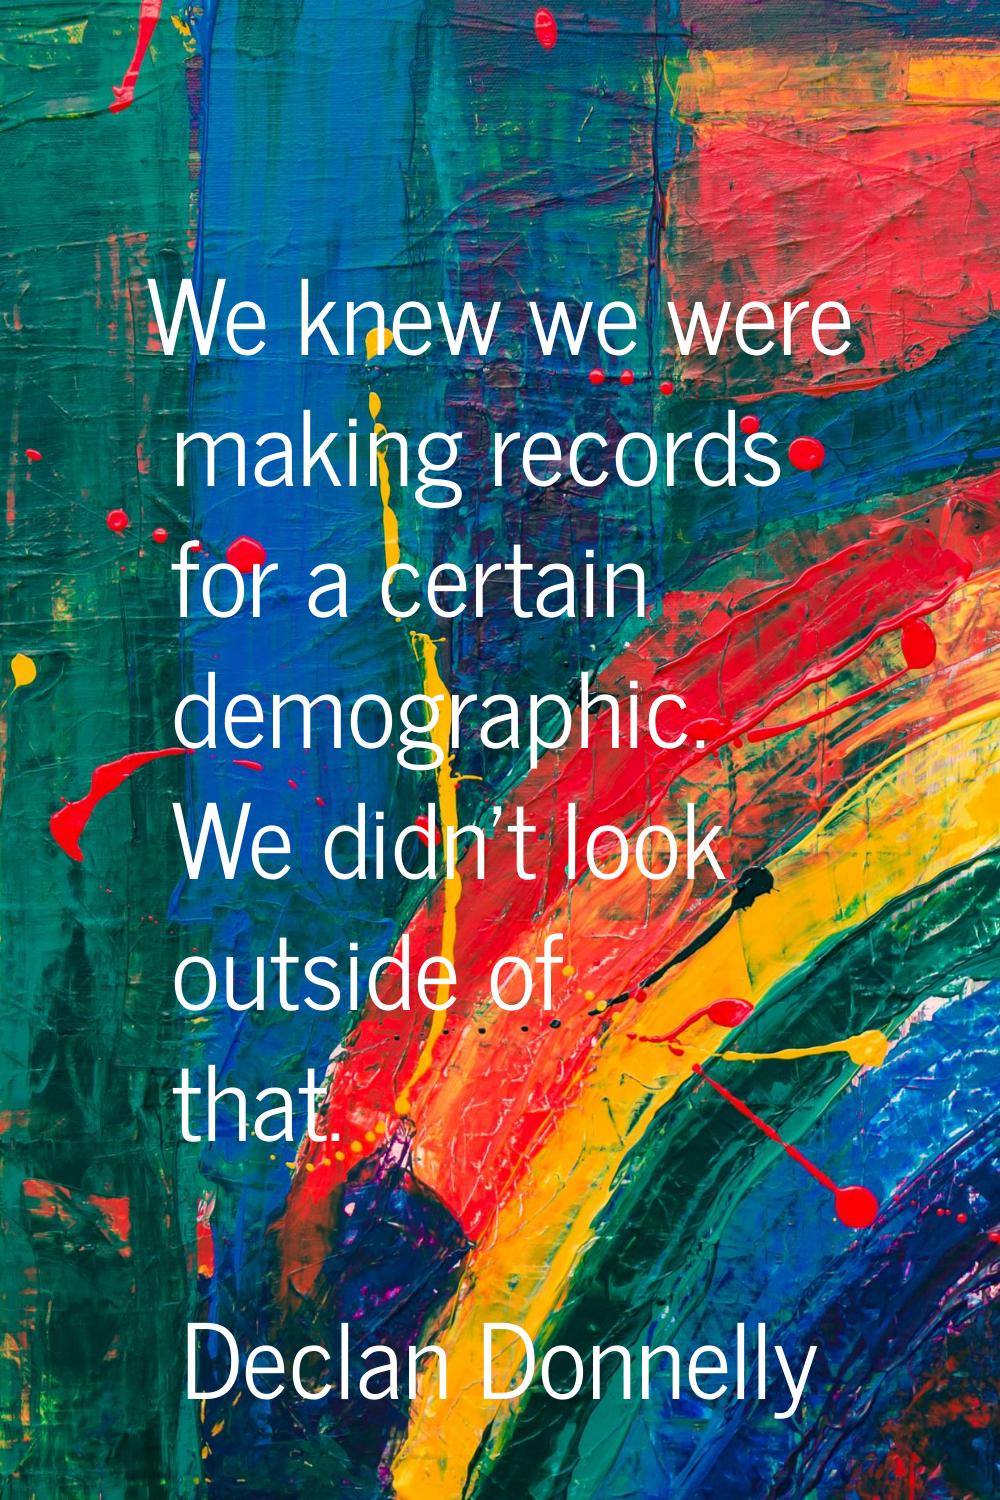 We knew we were making records for a certain demographic. We didn't look outside of that.